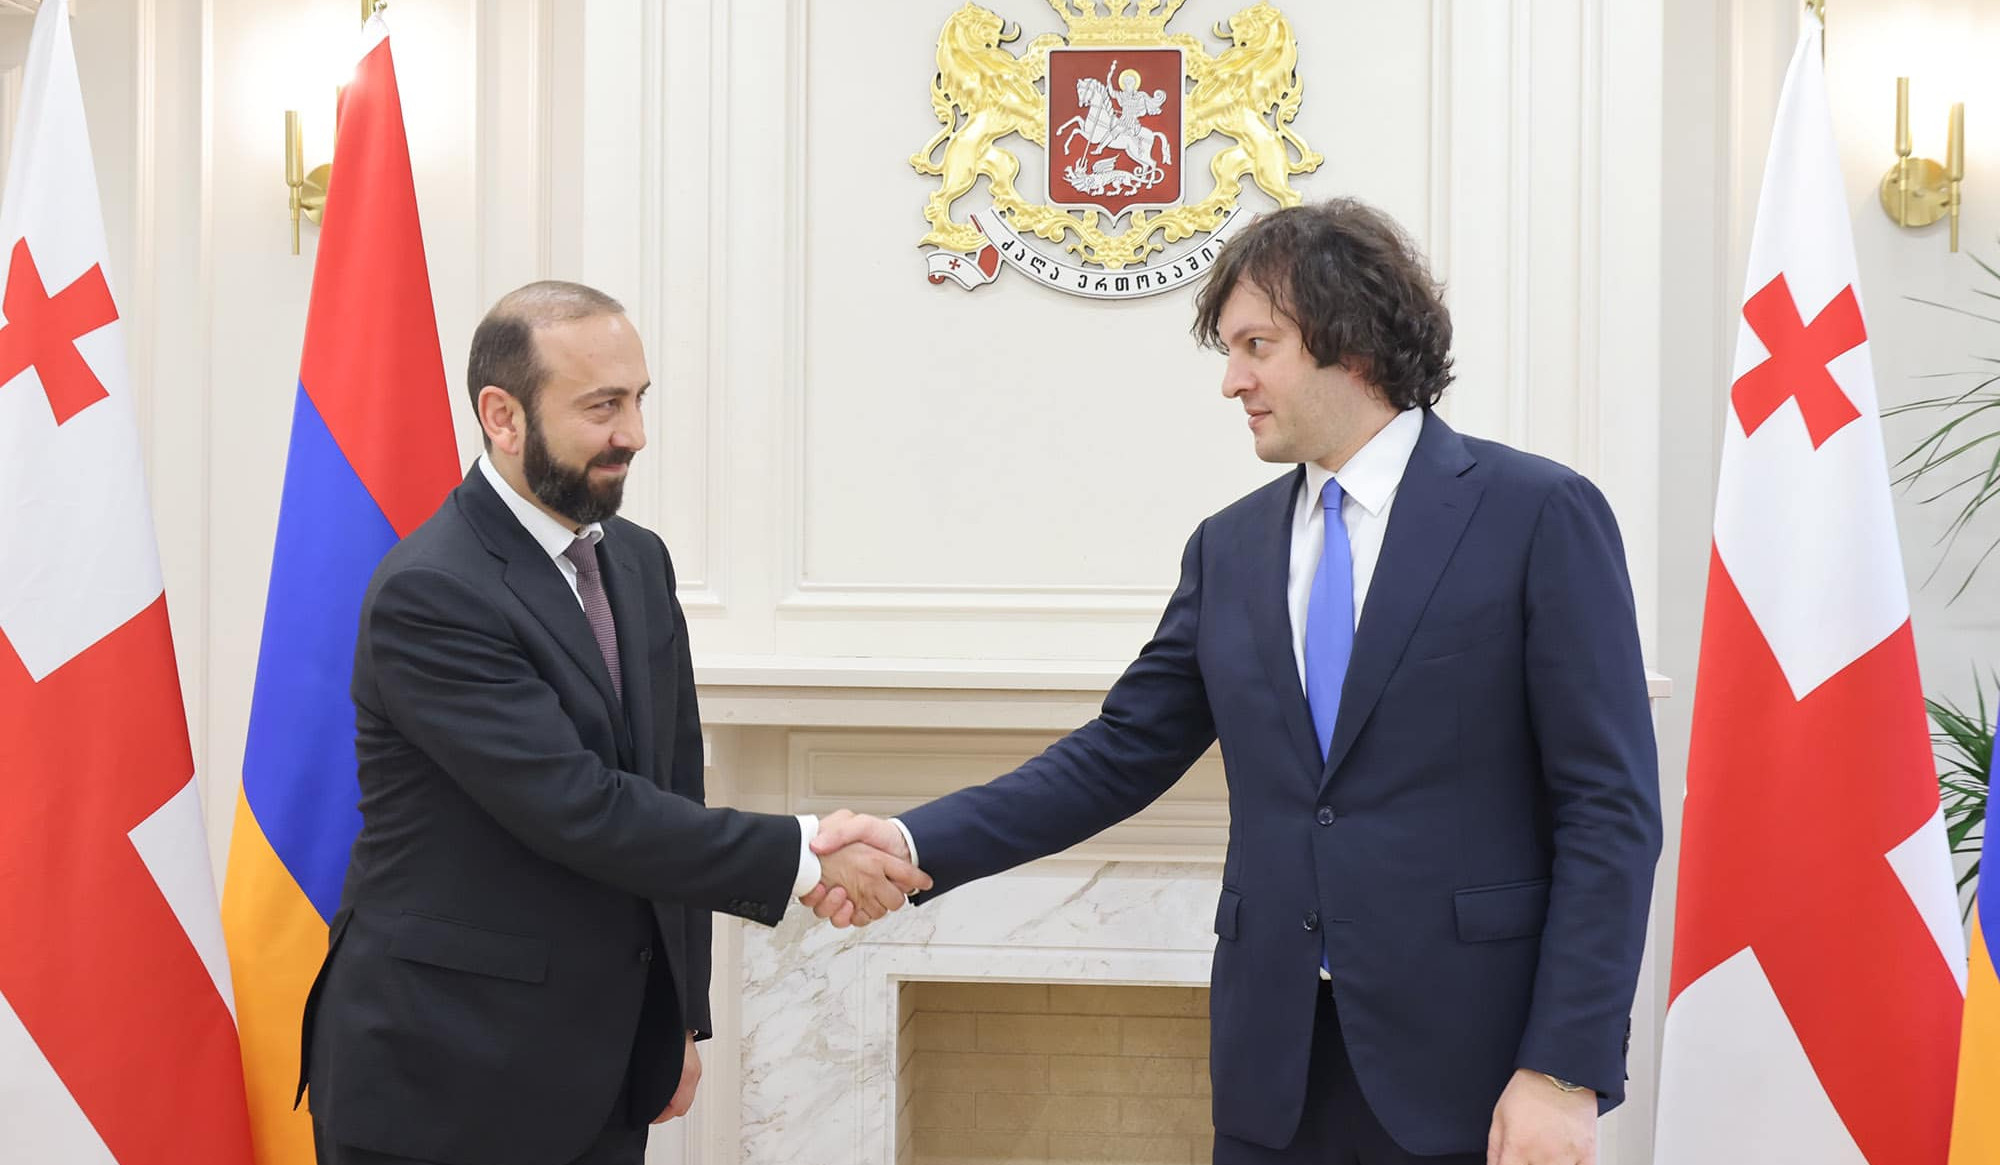 Armenia's Foreign Minister and Georgian Prime Minister discussed issues related to regional security